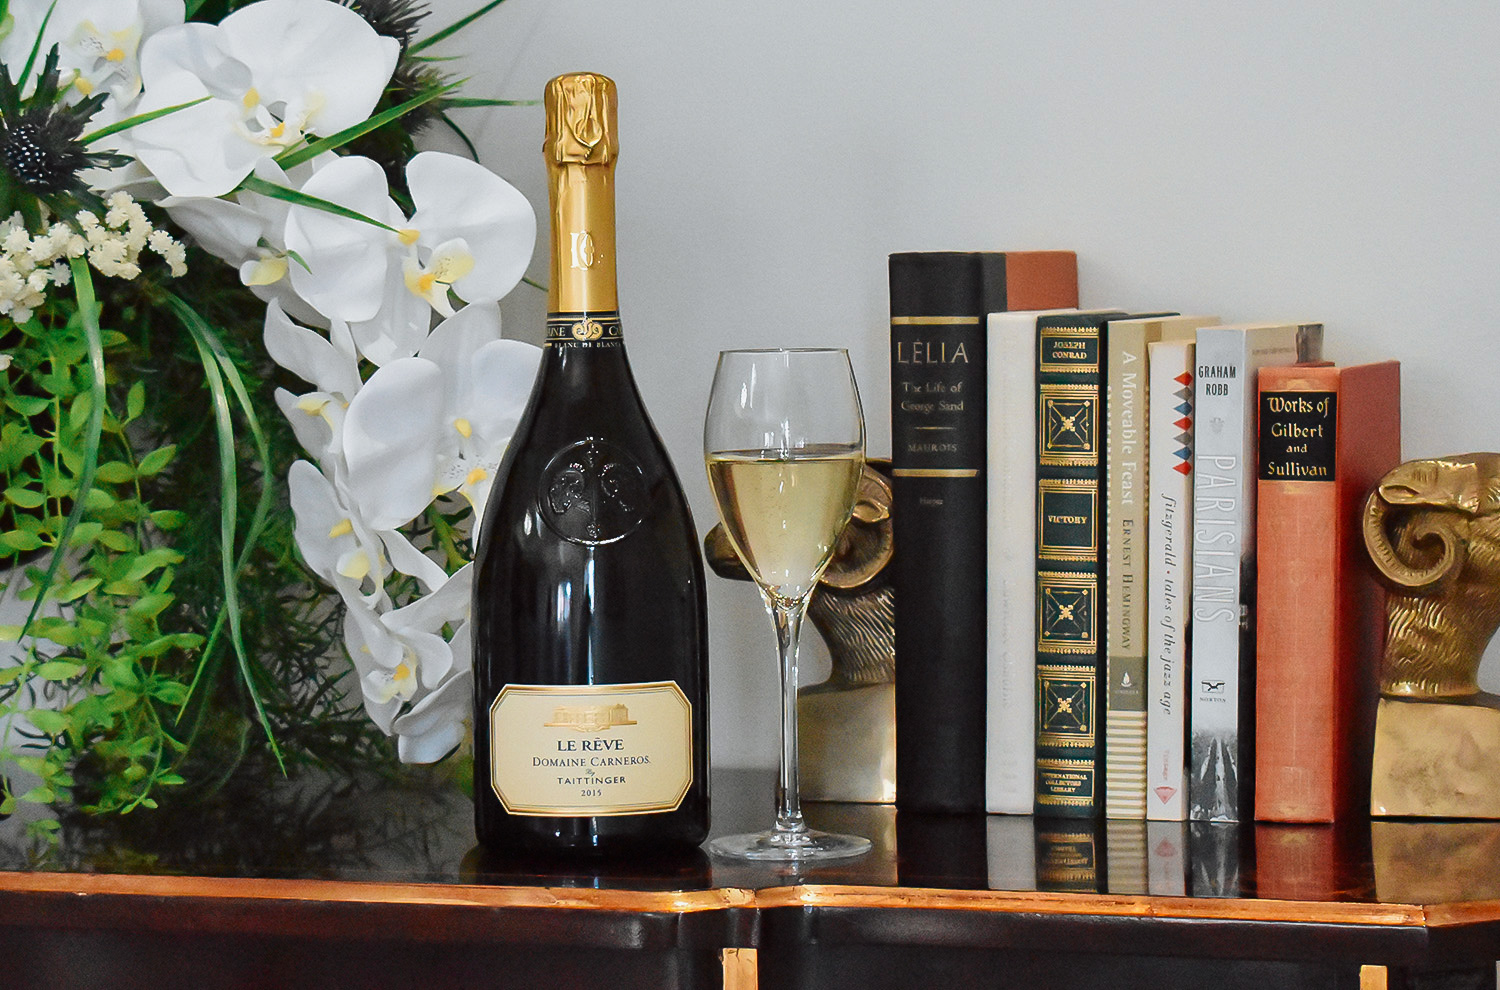 le reve bottle, wine and book pairings